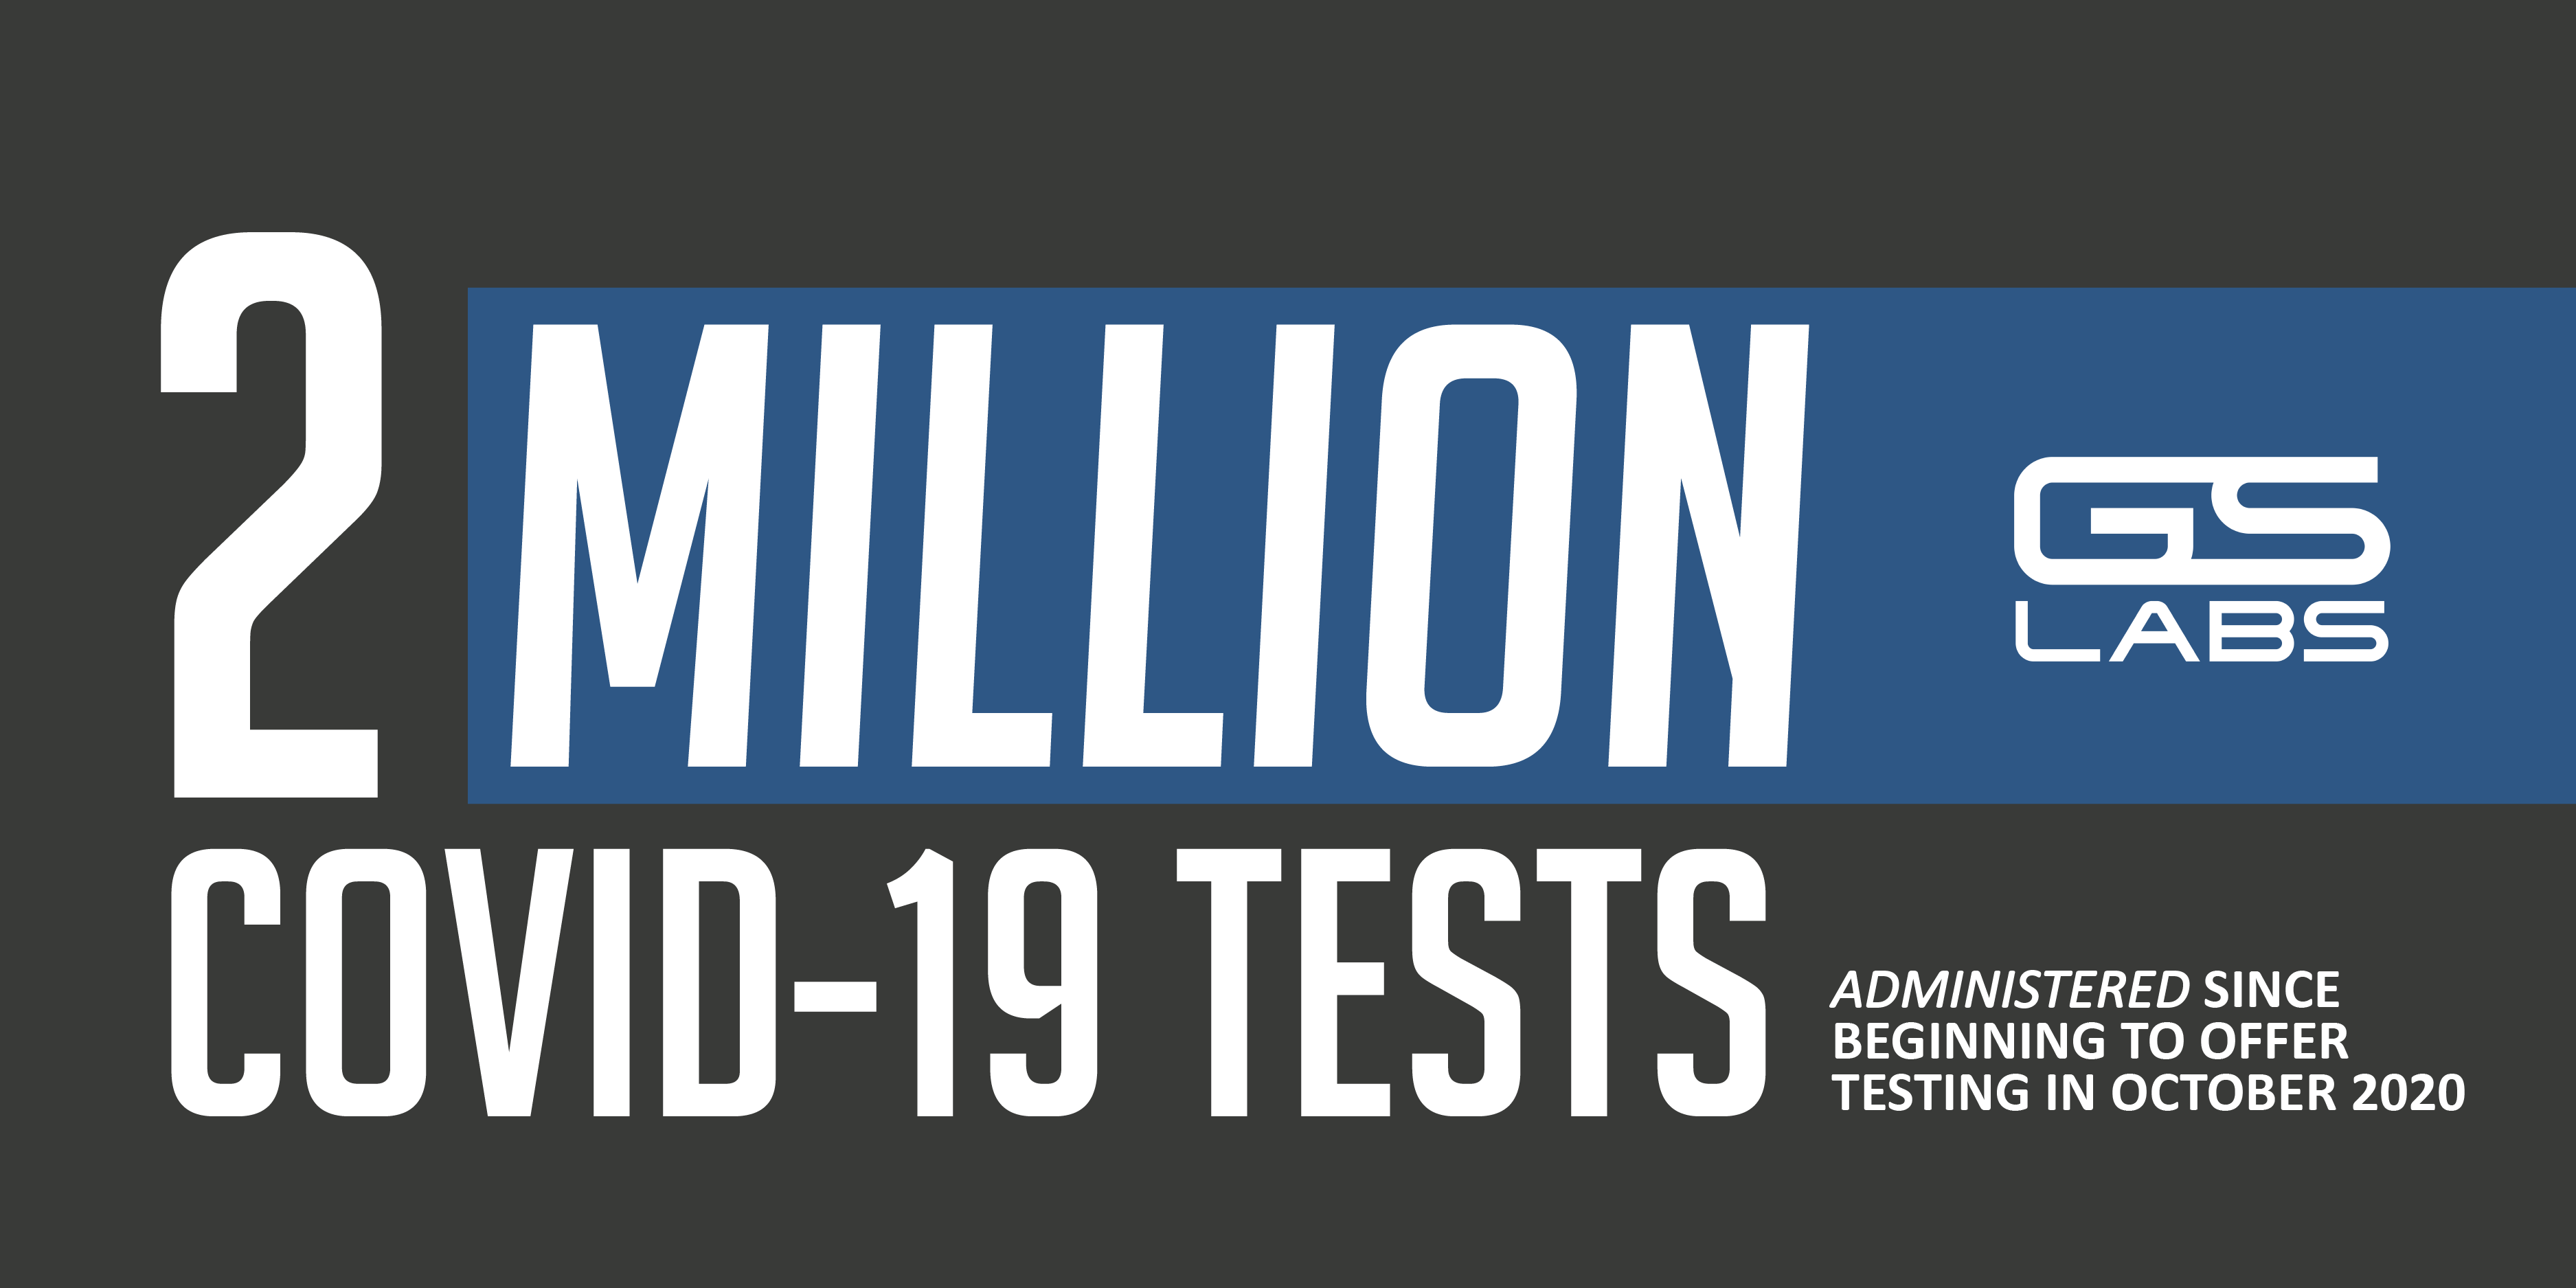 GS Labs - Provides Over 2 million COVID-19 tests